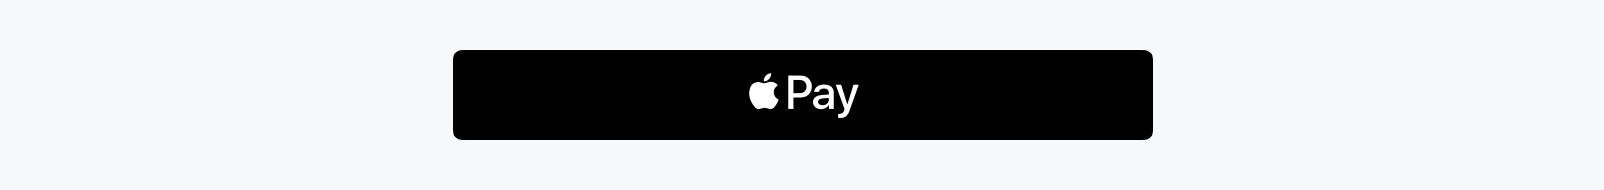 Apple_Pay_Button.png